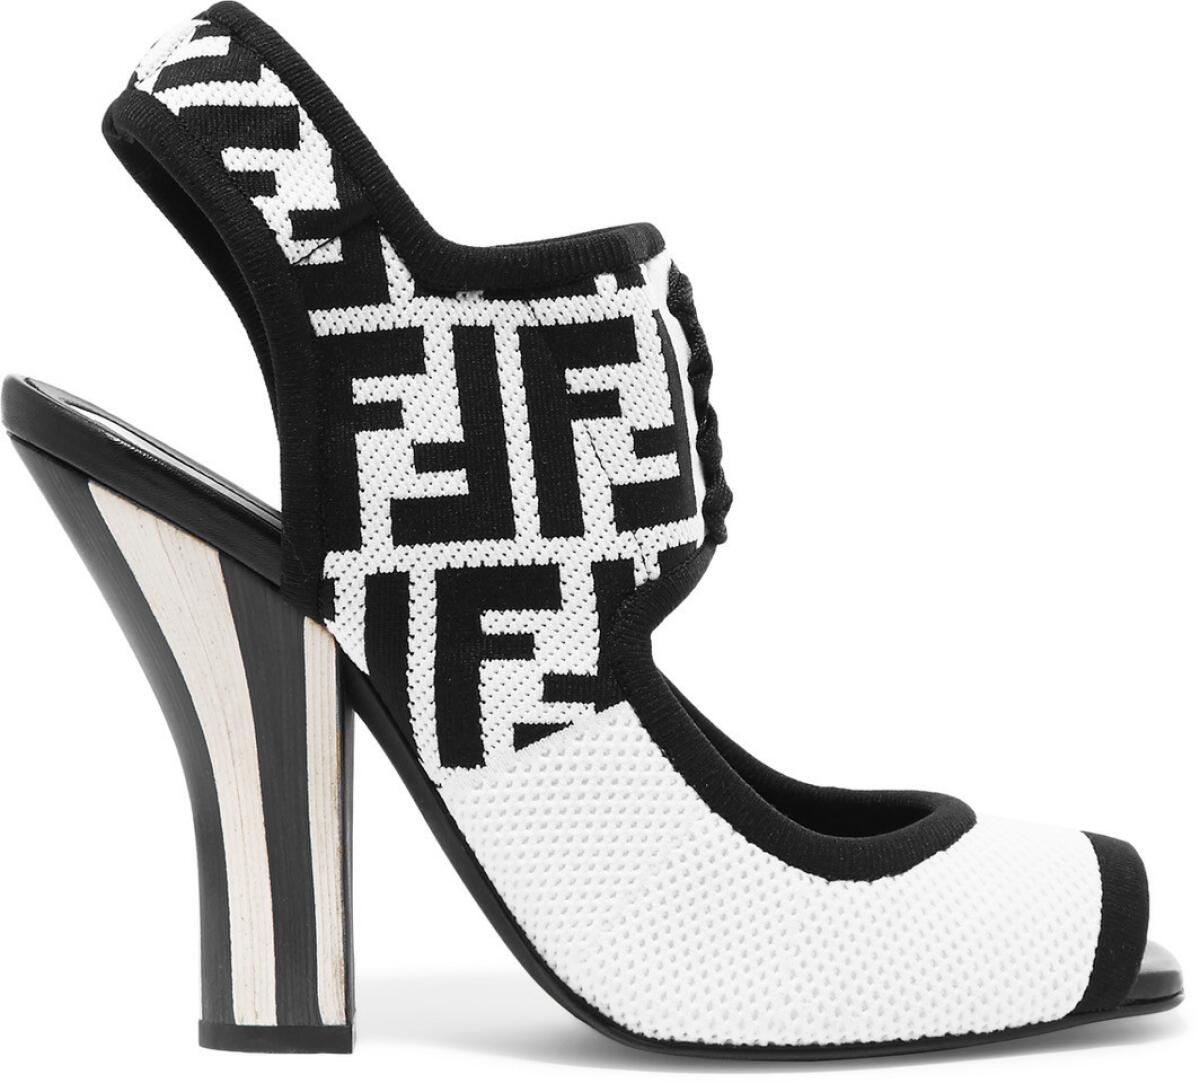 A capsule collection from Fendi launched by Net-a-Porter.